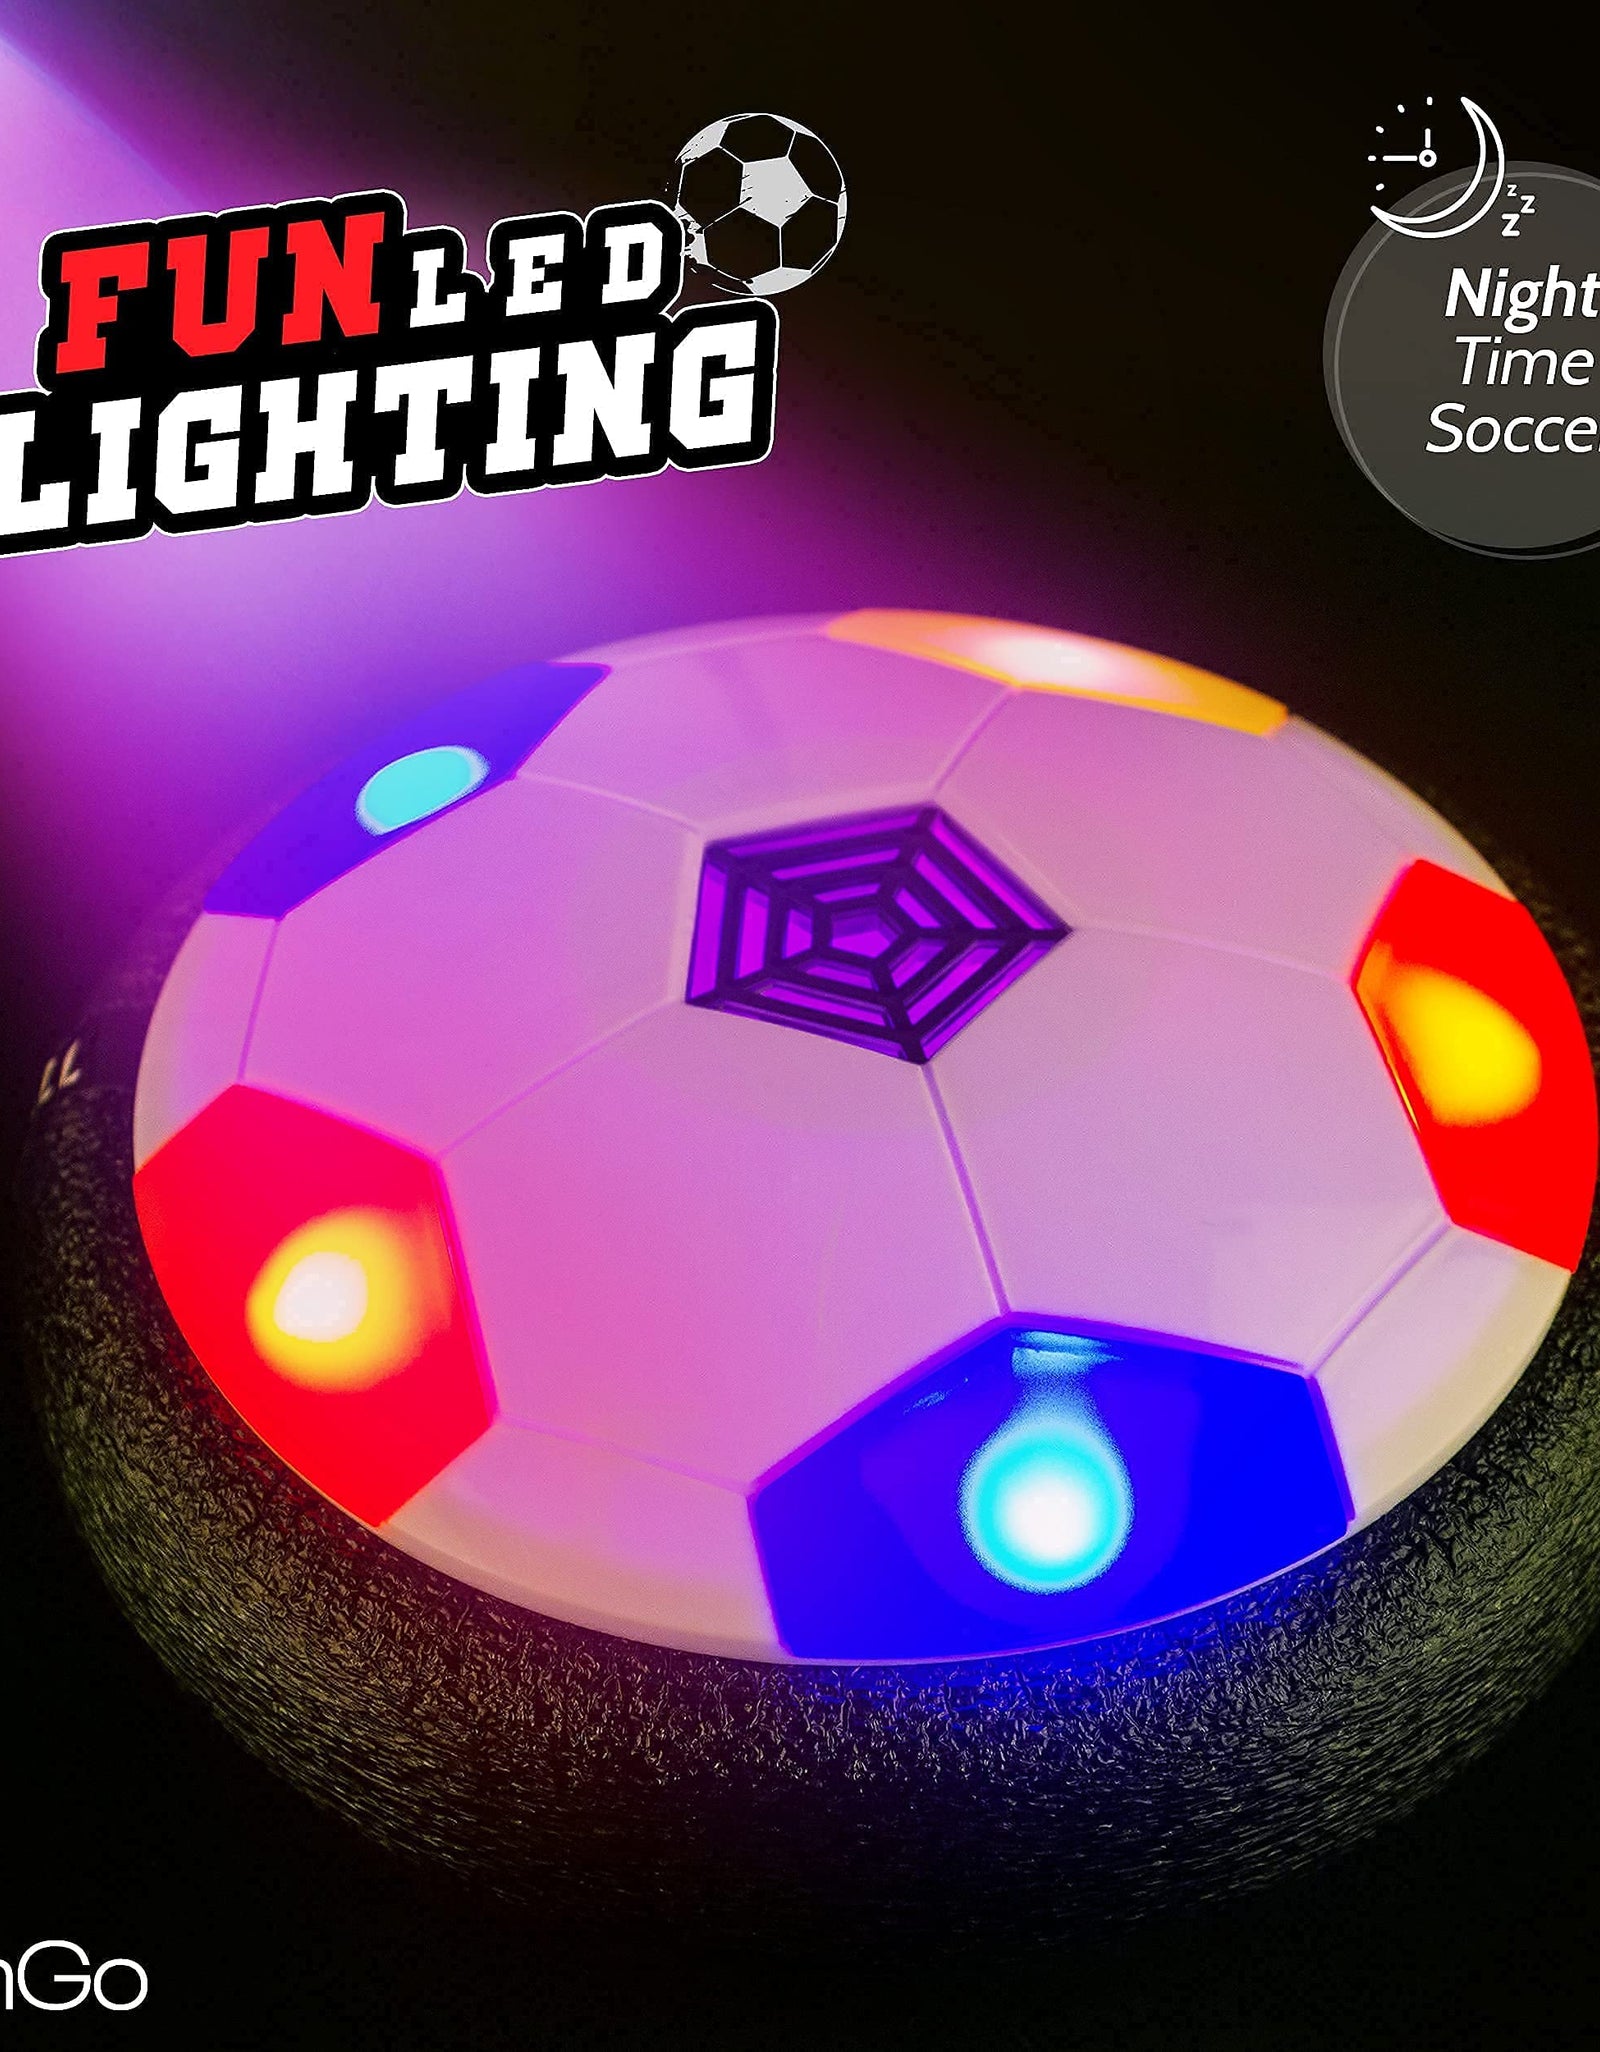 Hover Soccer Ball for Kids | Flashing Colored LED Lights | for Smooth Surfaces | New Football Toy, Indoor Battery Operated Air Floating Hovering Disc for Girls and Boys, Soft Foam Bumpers, Ages 3-13